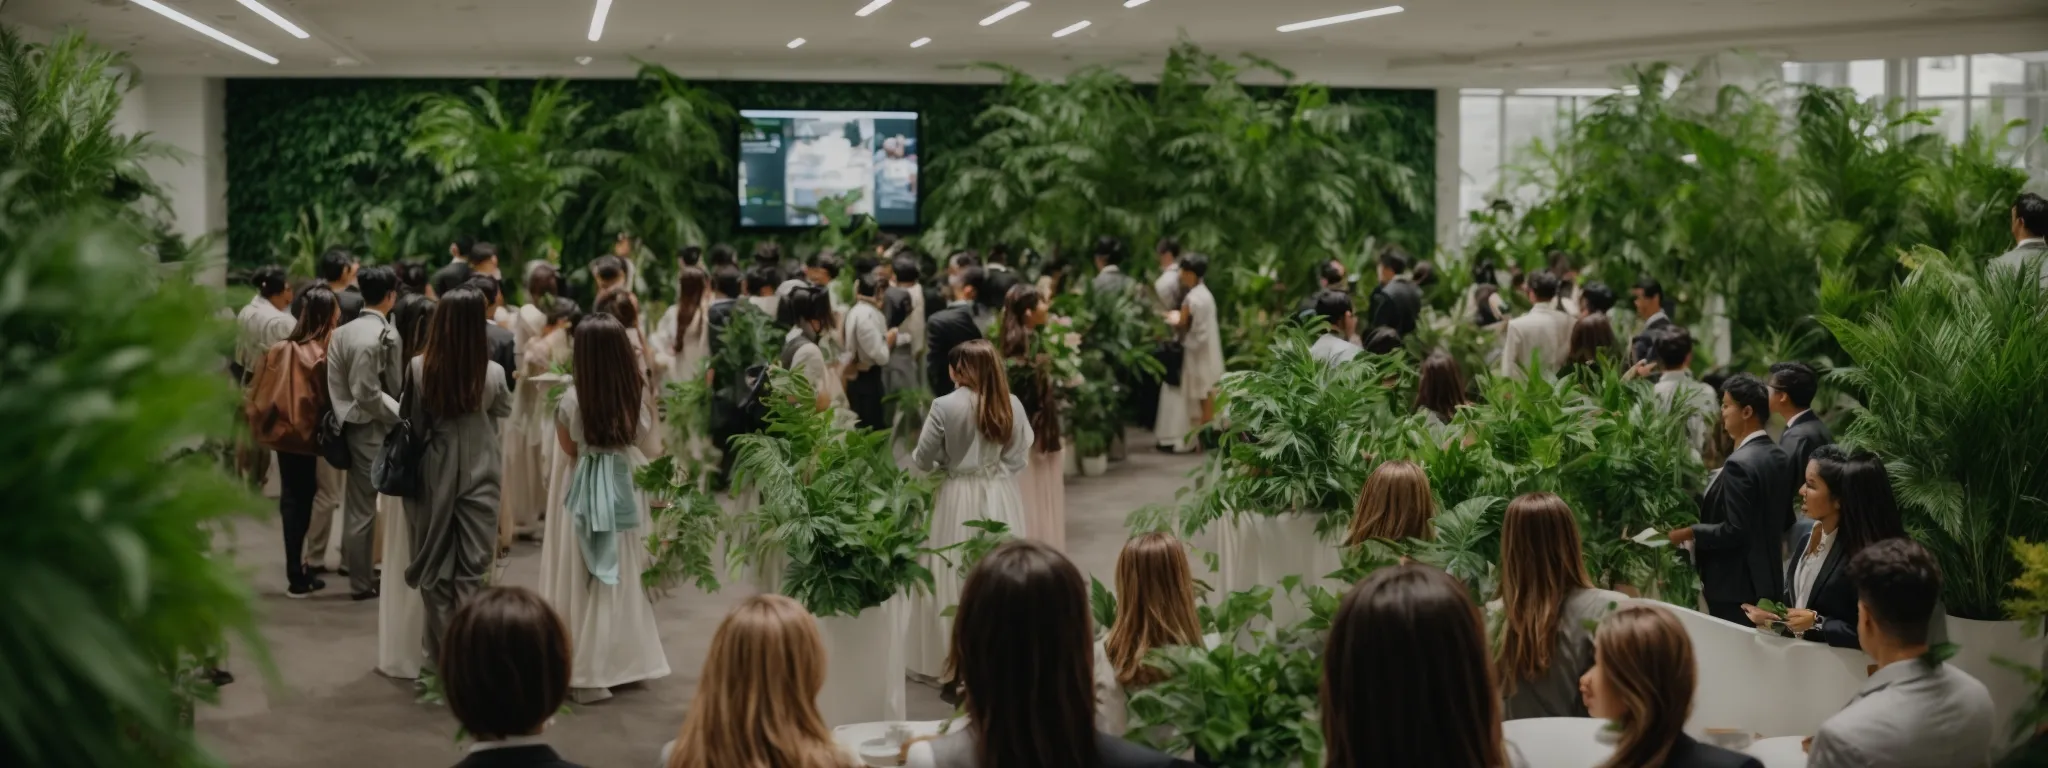 a group of people mingle in a bright conference hall adorned with green plants and wellness product displays.